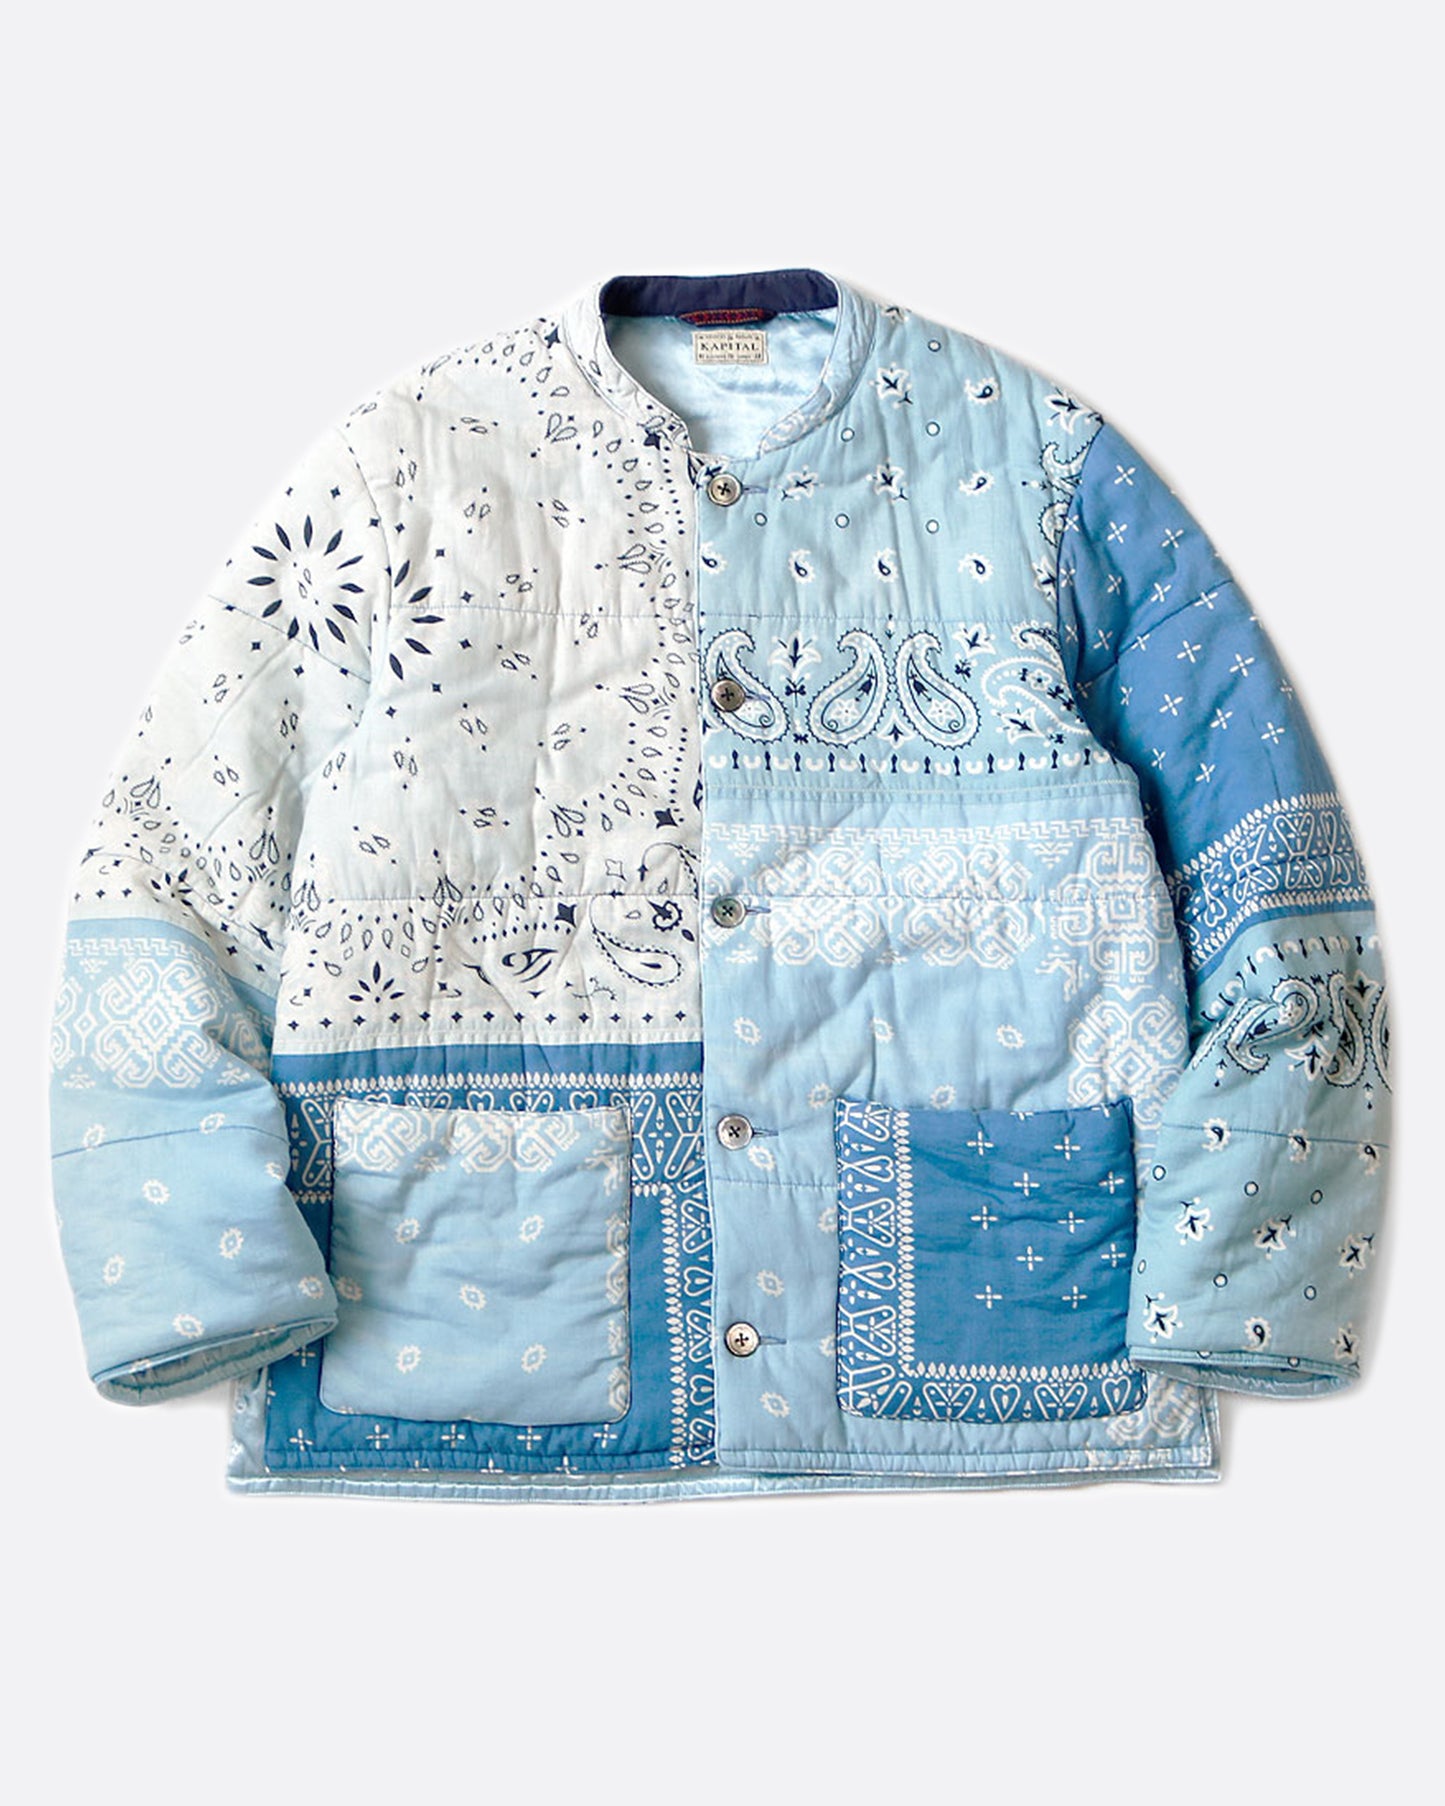 A button down quilted patchwork bandana jacket, shown laying flat in the light blue colorway.